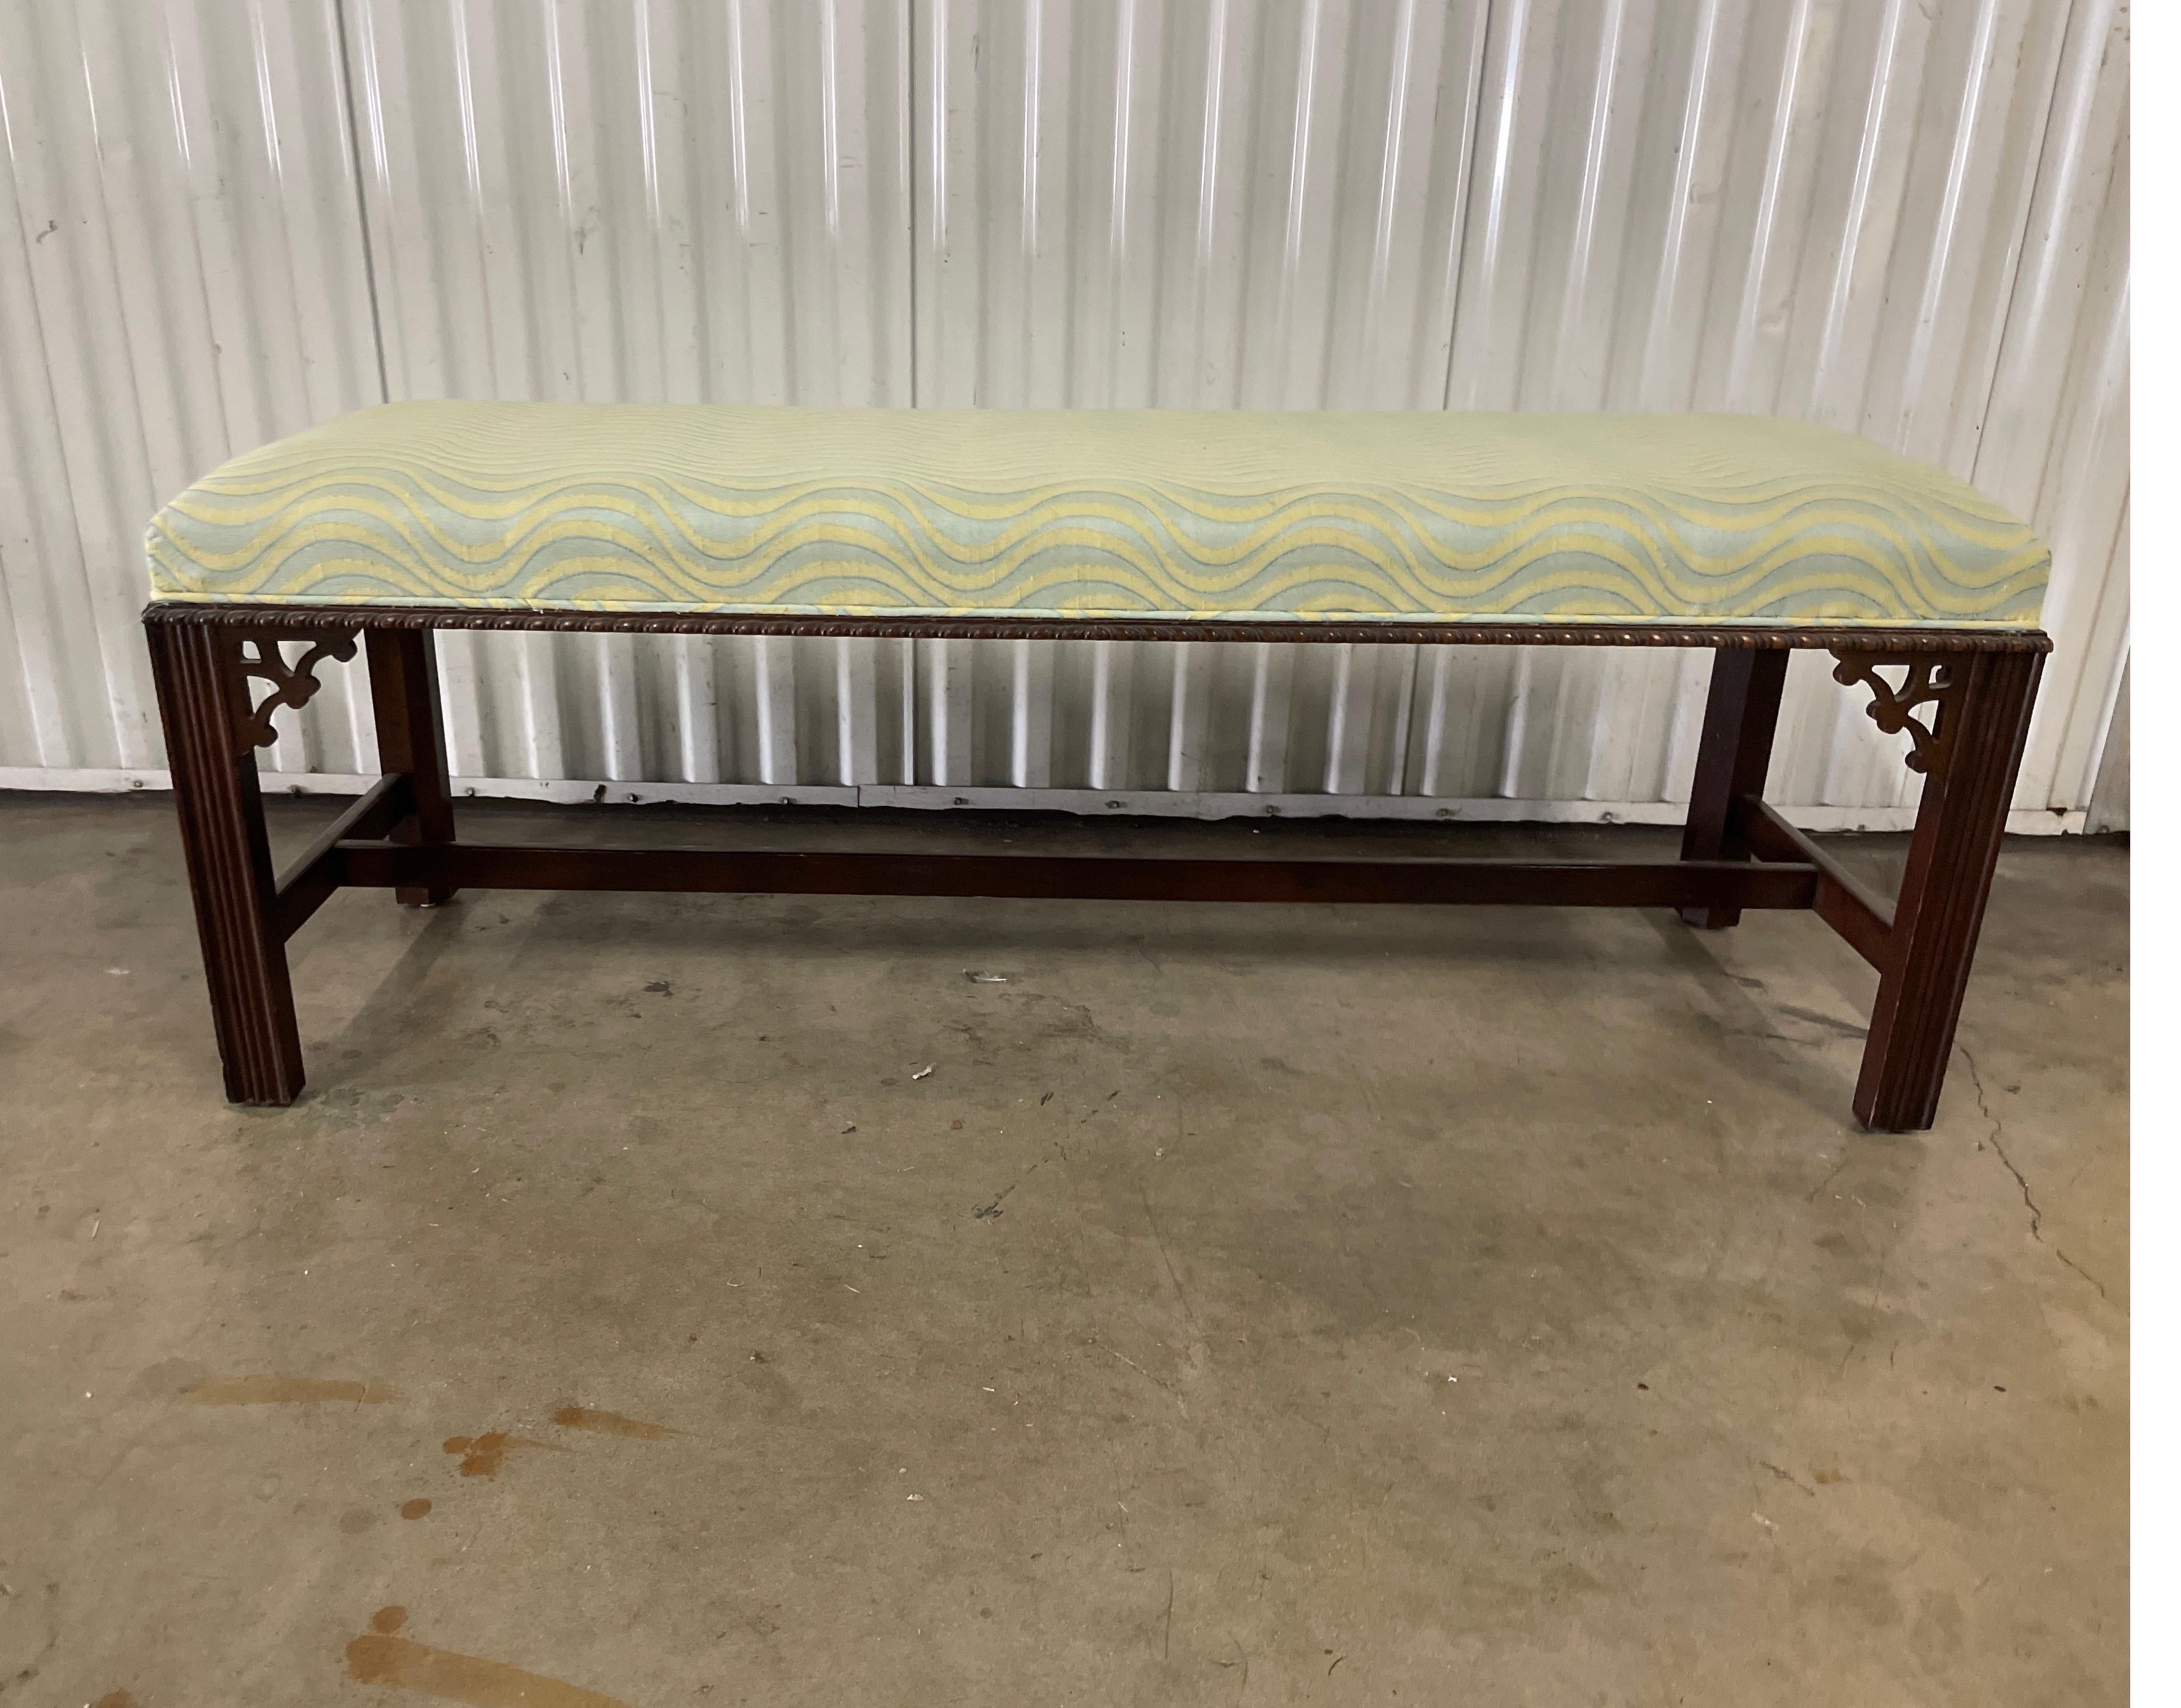 Chinese Chippendale style upholstered bench. Very nice detail around the top cushion and fretwork in all four corners. Fabric has a wave design. Very simple, yet elegant.